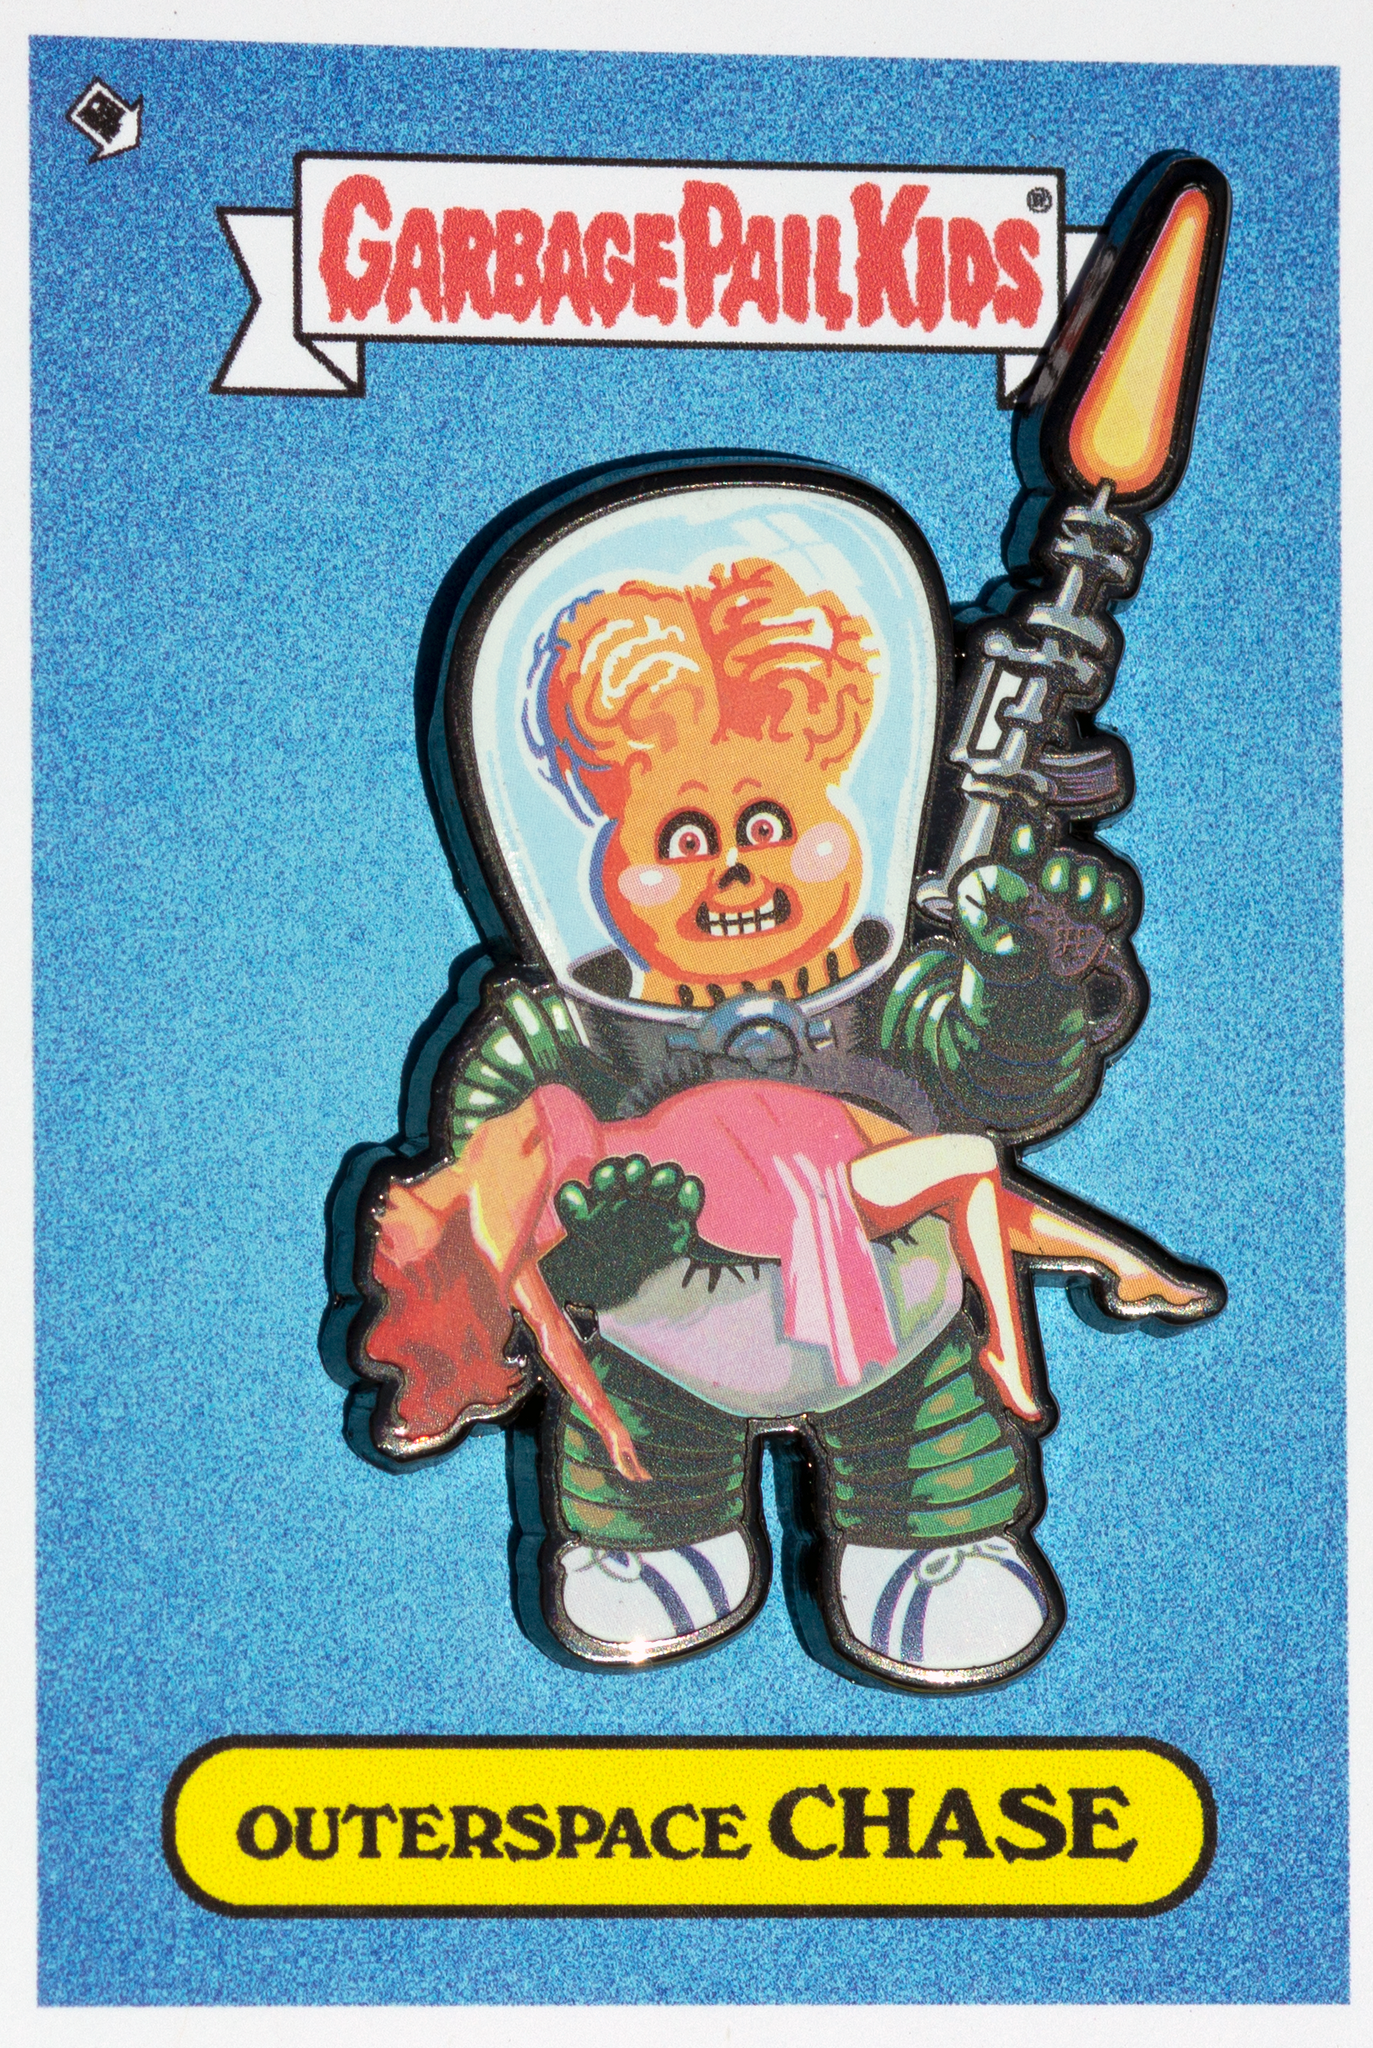 Garbage Pail Kids - Mars Attacks -  Outerspace Chase- Limited Edition - Enamel Pin and Exclusive Promo Trading Card